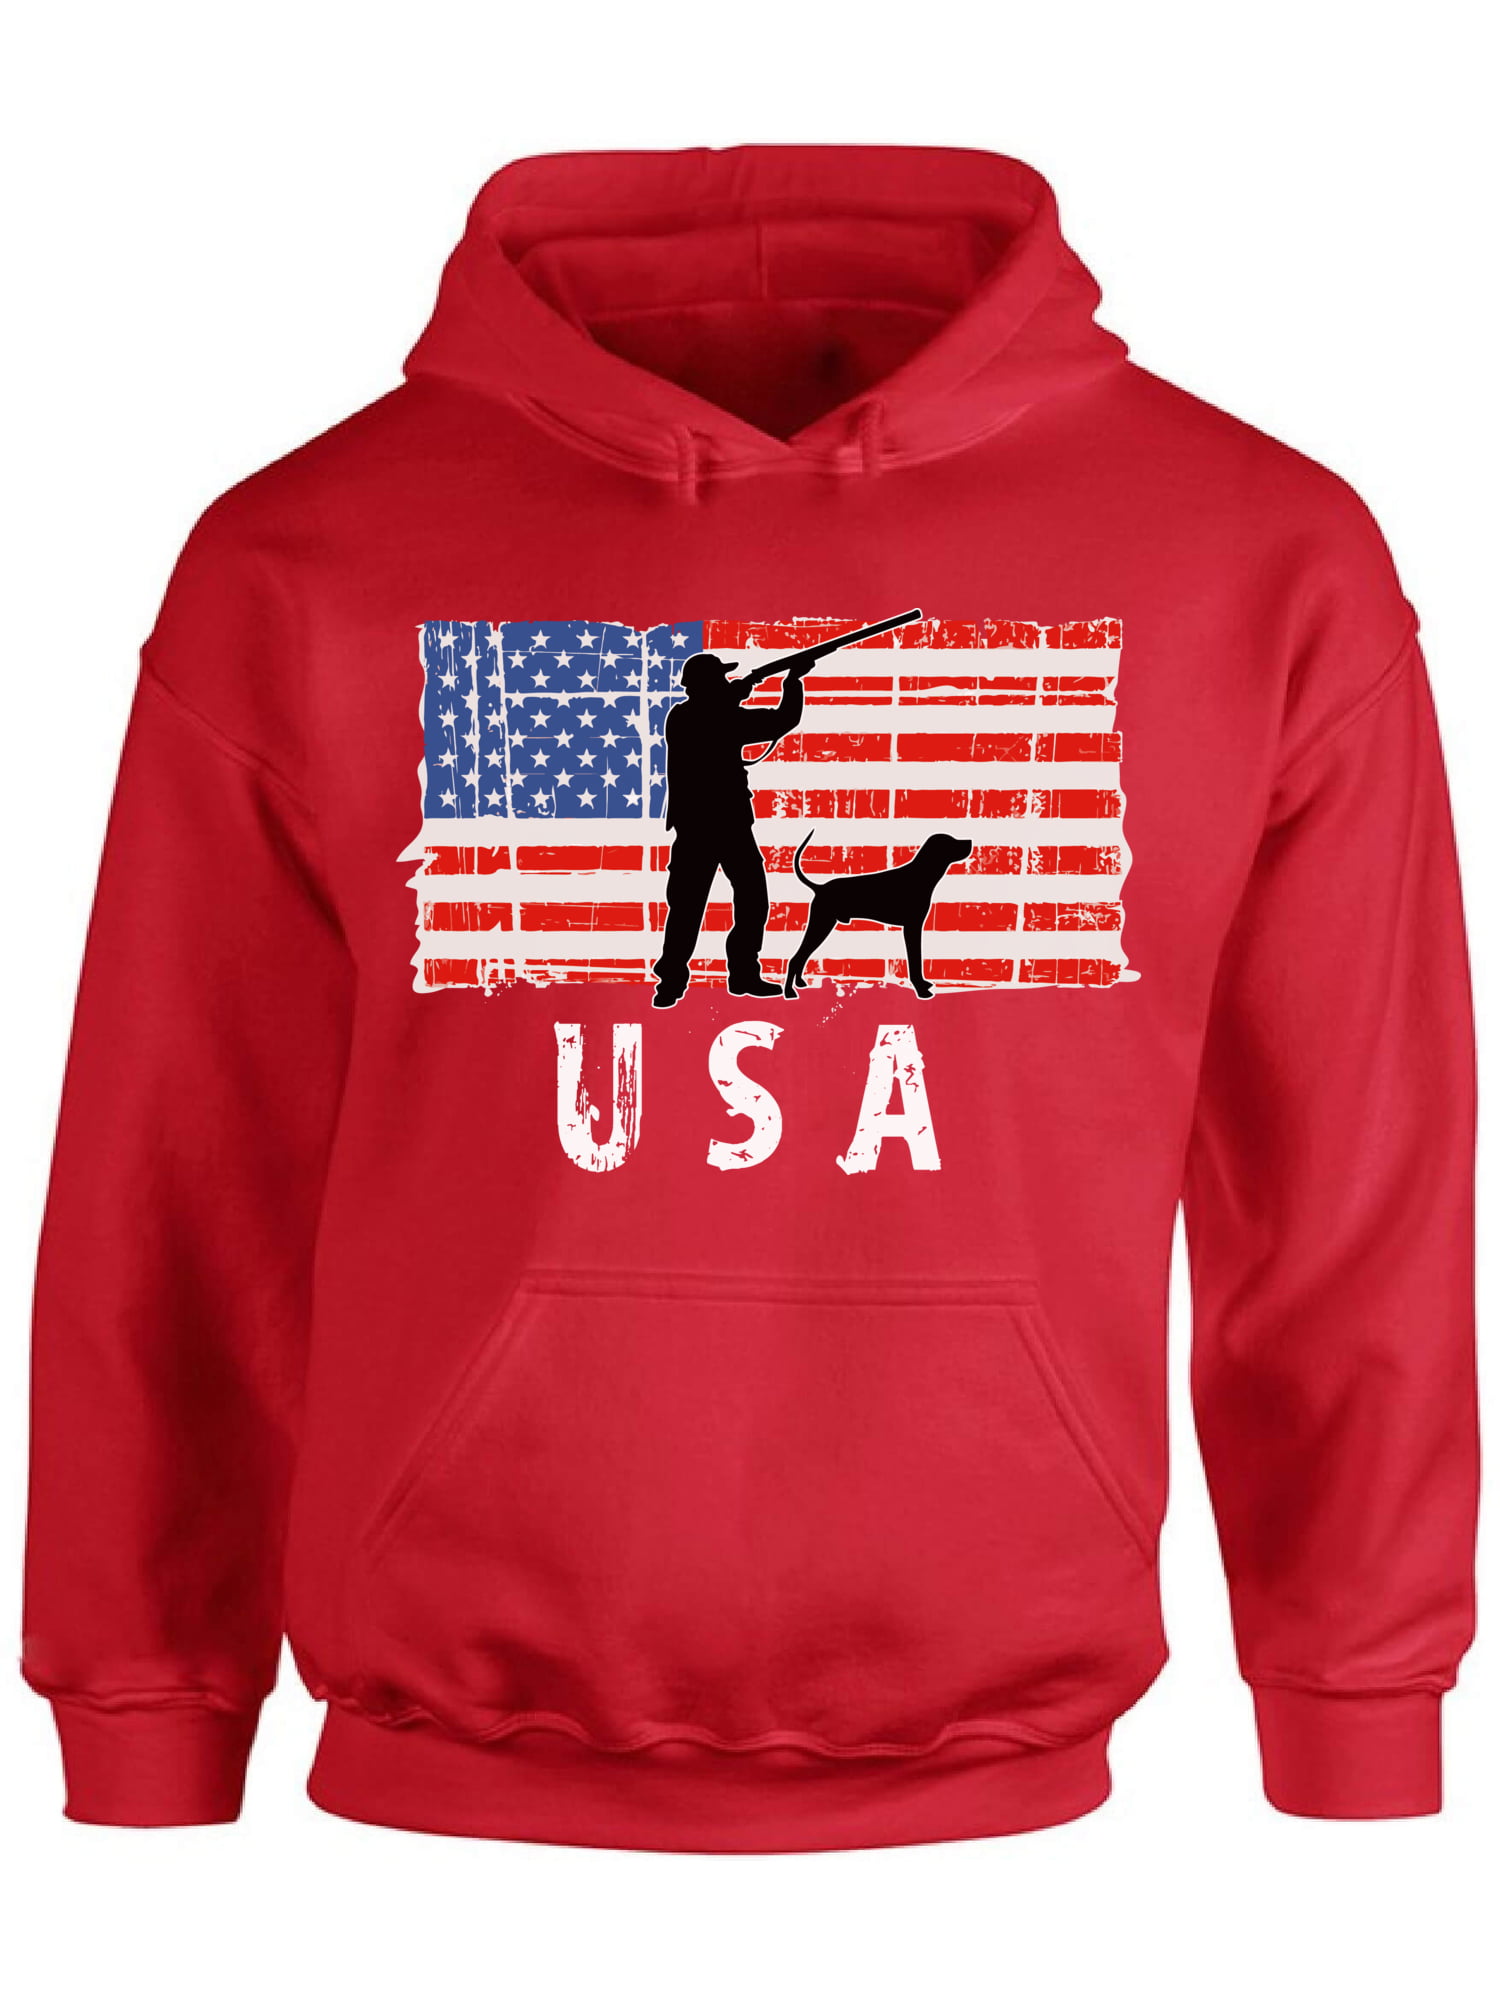 Vintage USA Stars and Stripes United States of America Americana Hoodie Pullover 